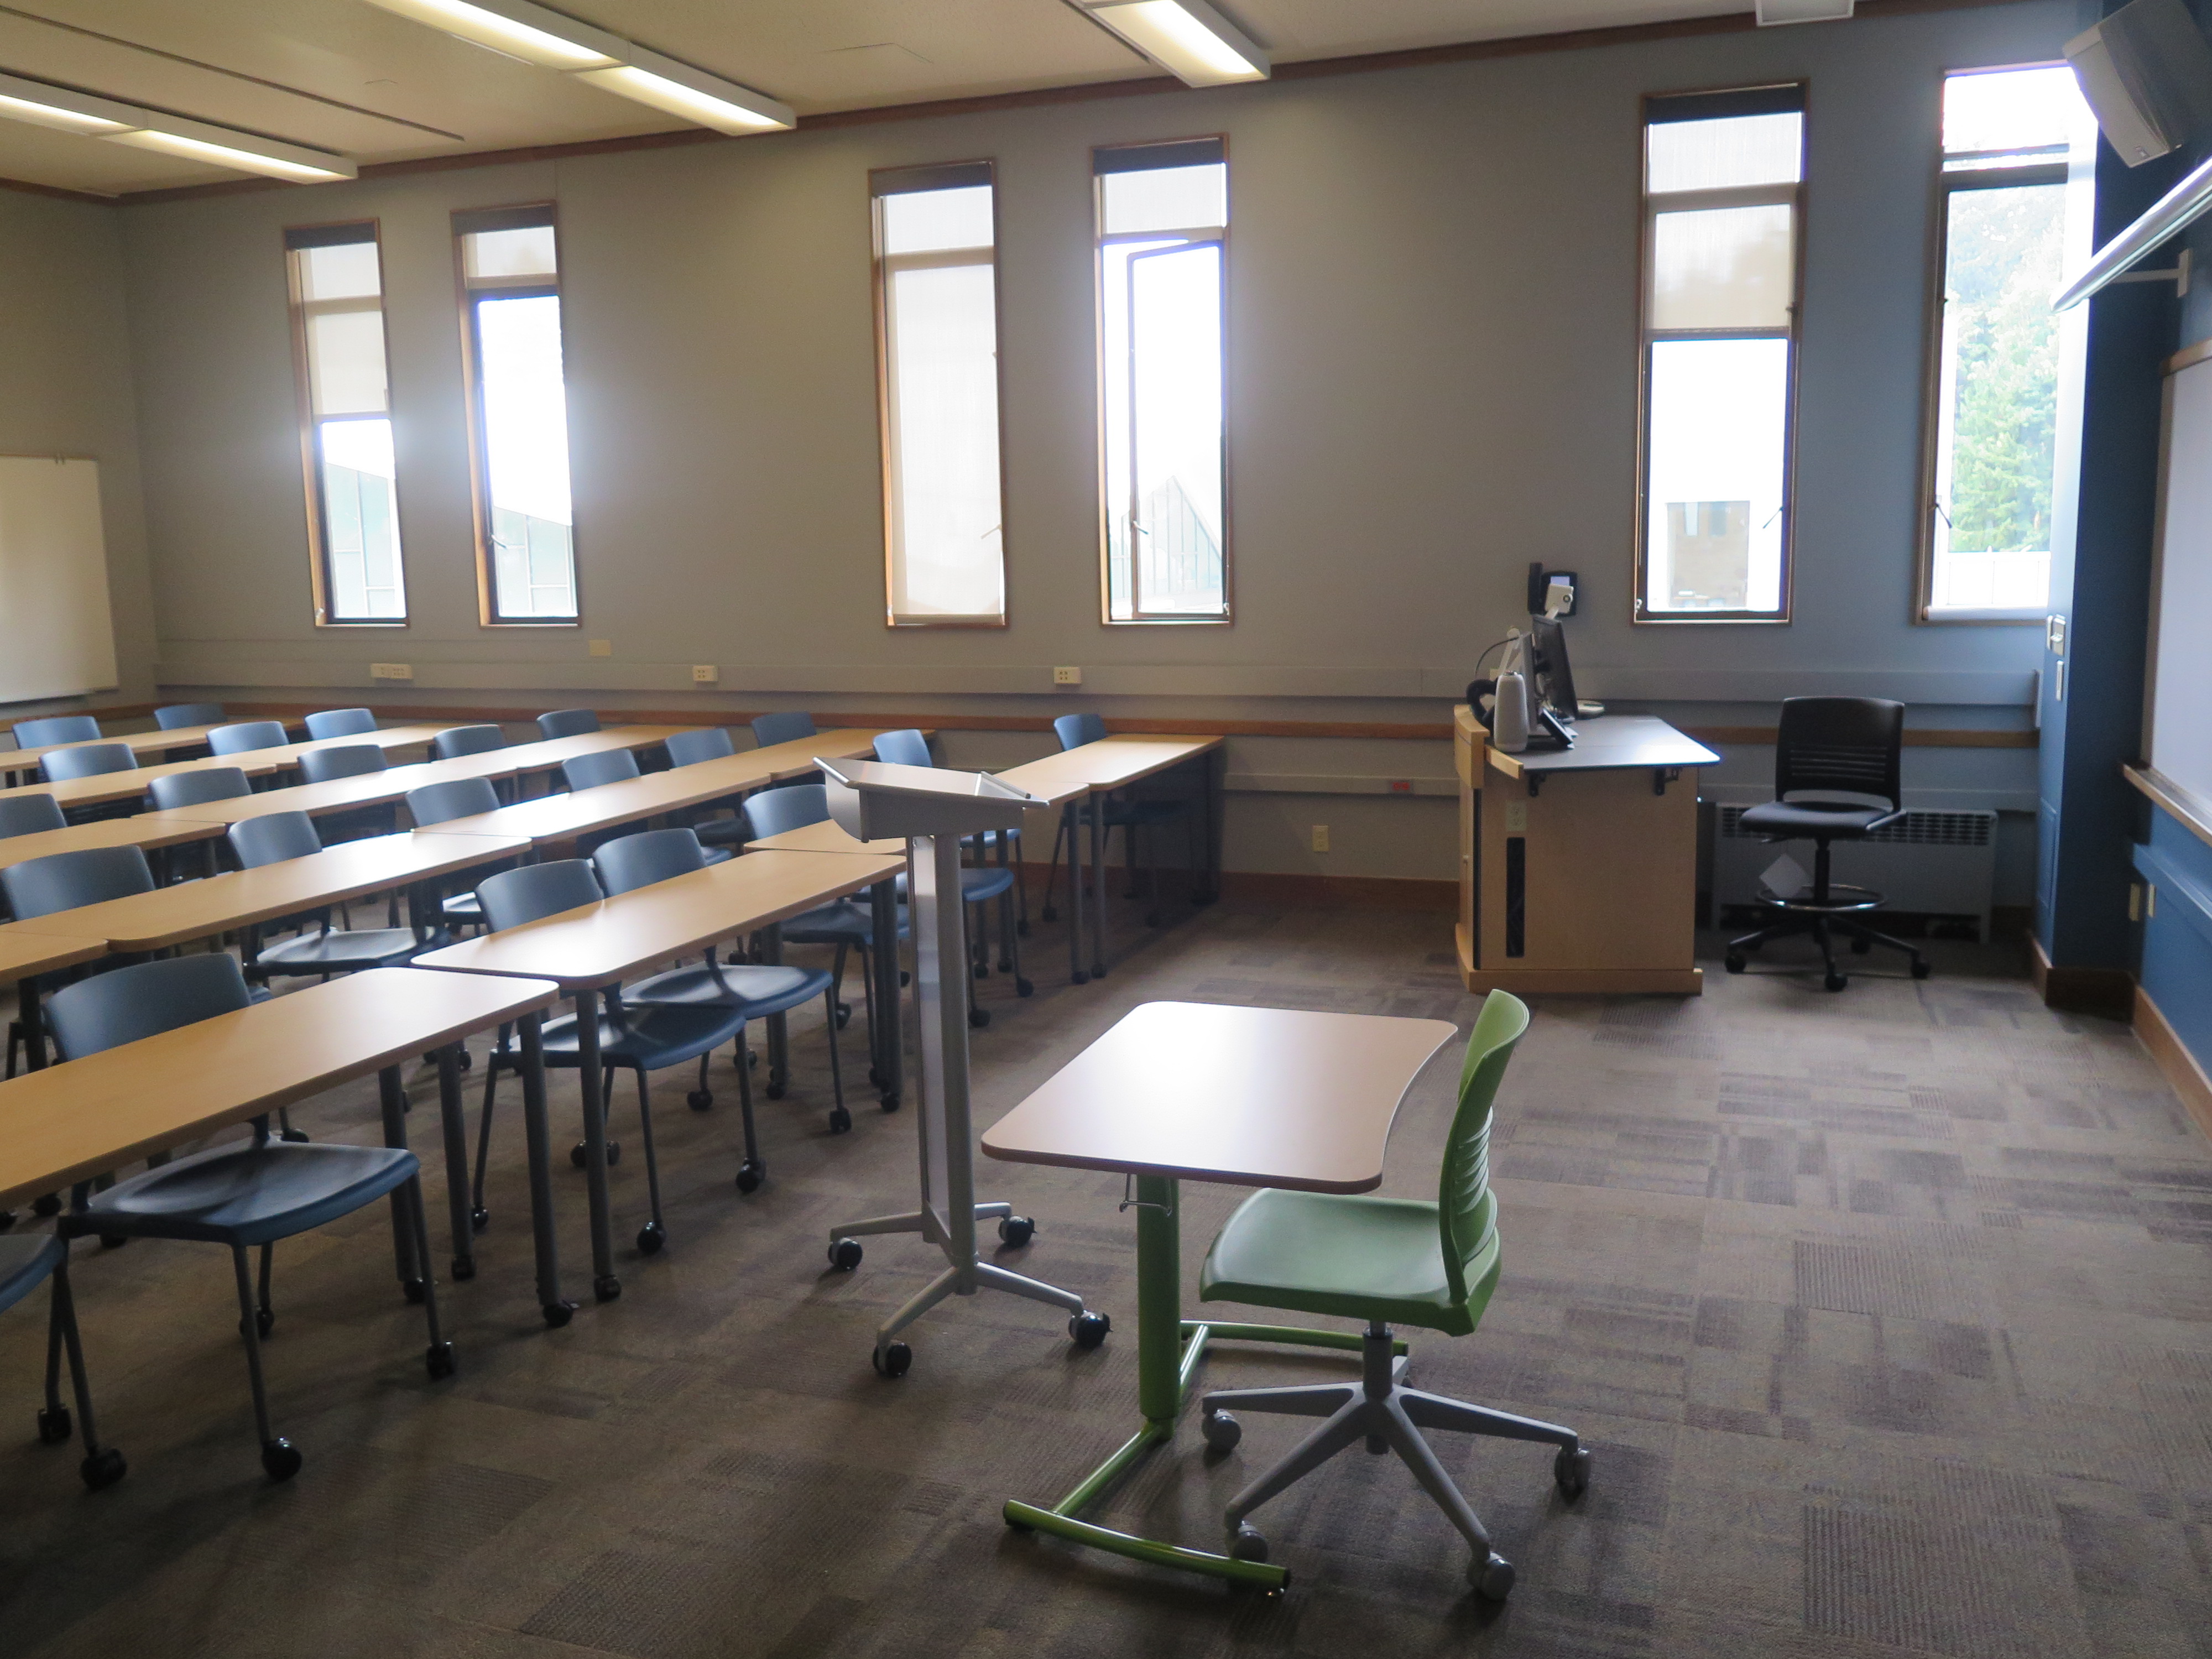 View from the classroom entrance. Consists of Moveable tables and chairs. Podium at the front of the room, white boards across the front and back walls.